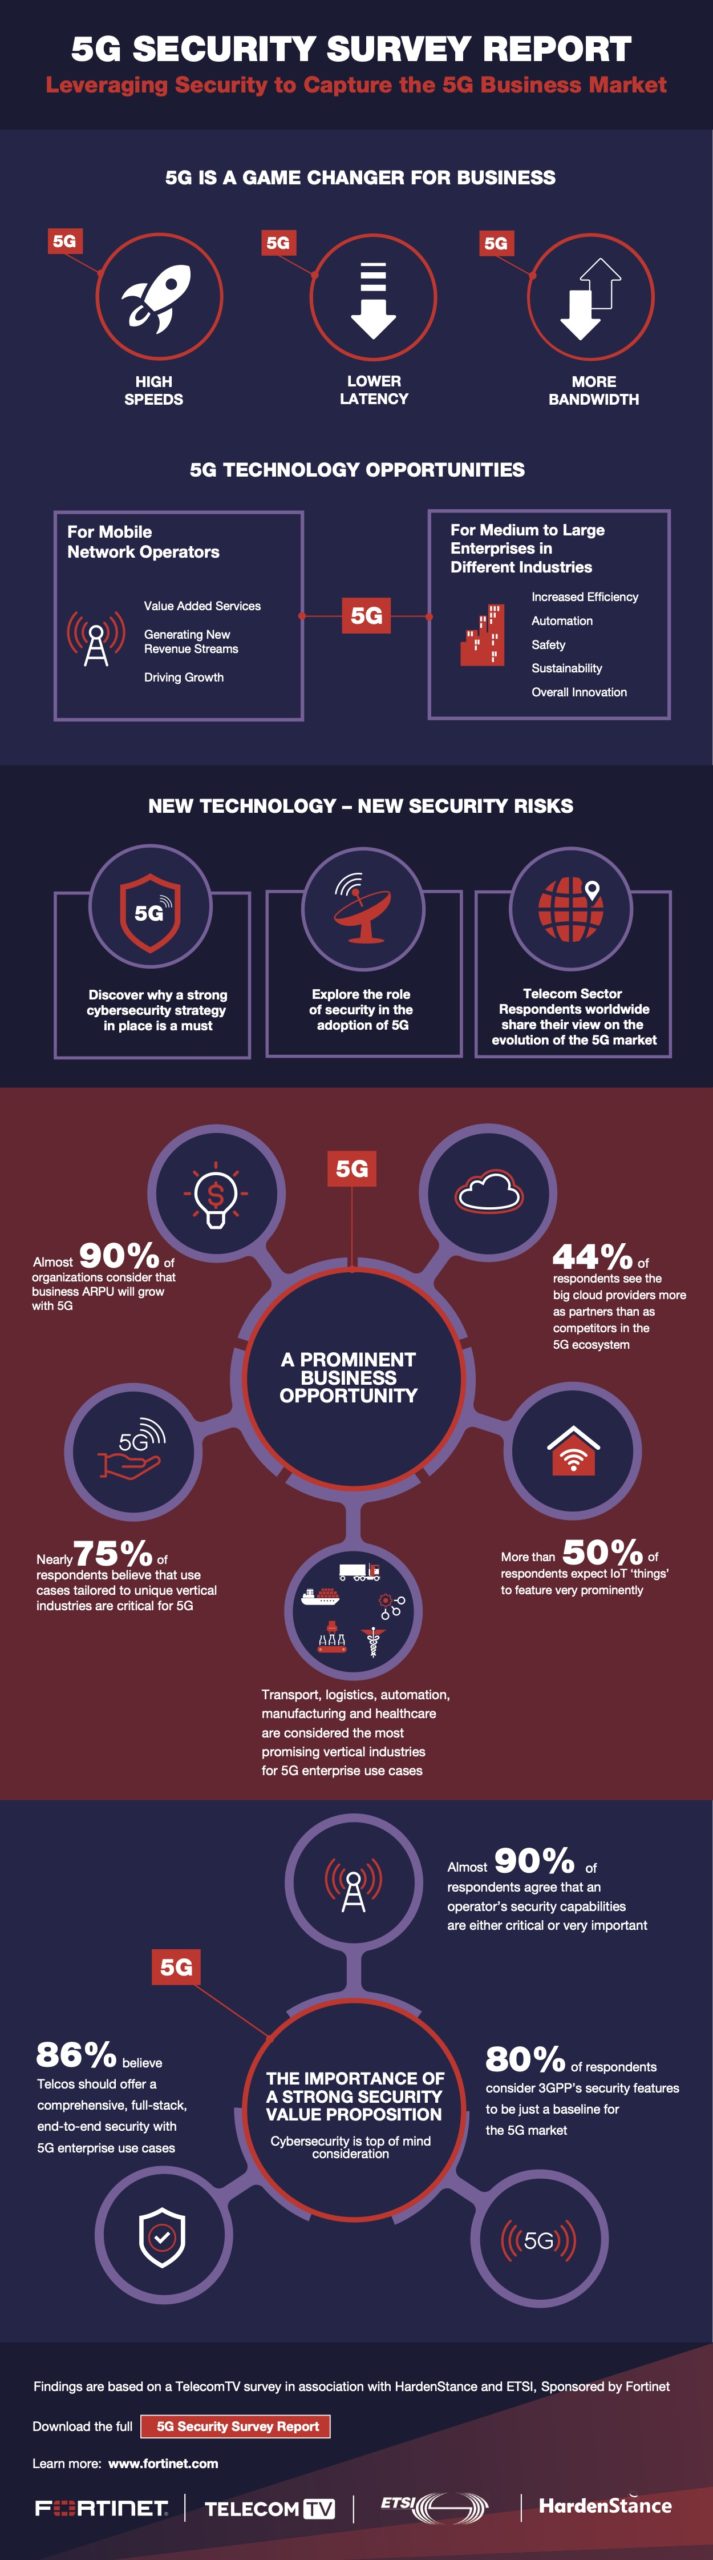 Image for New Fortinet Survey Points To Optimism On 5G Promise While Highlighting Role Of Security